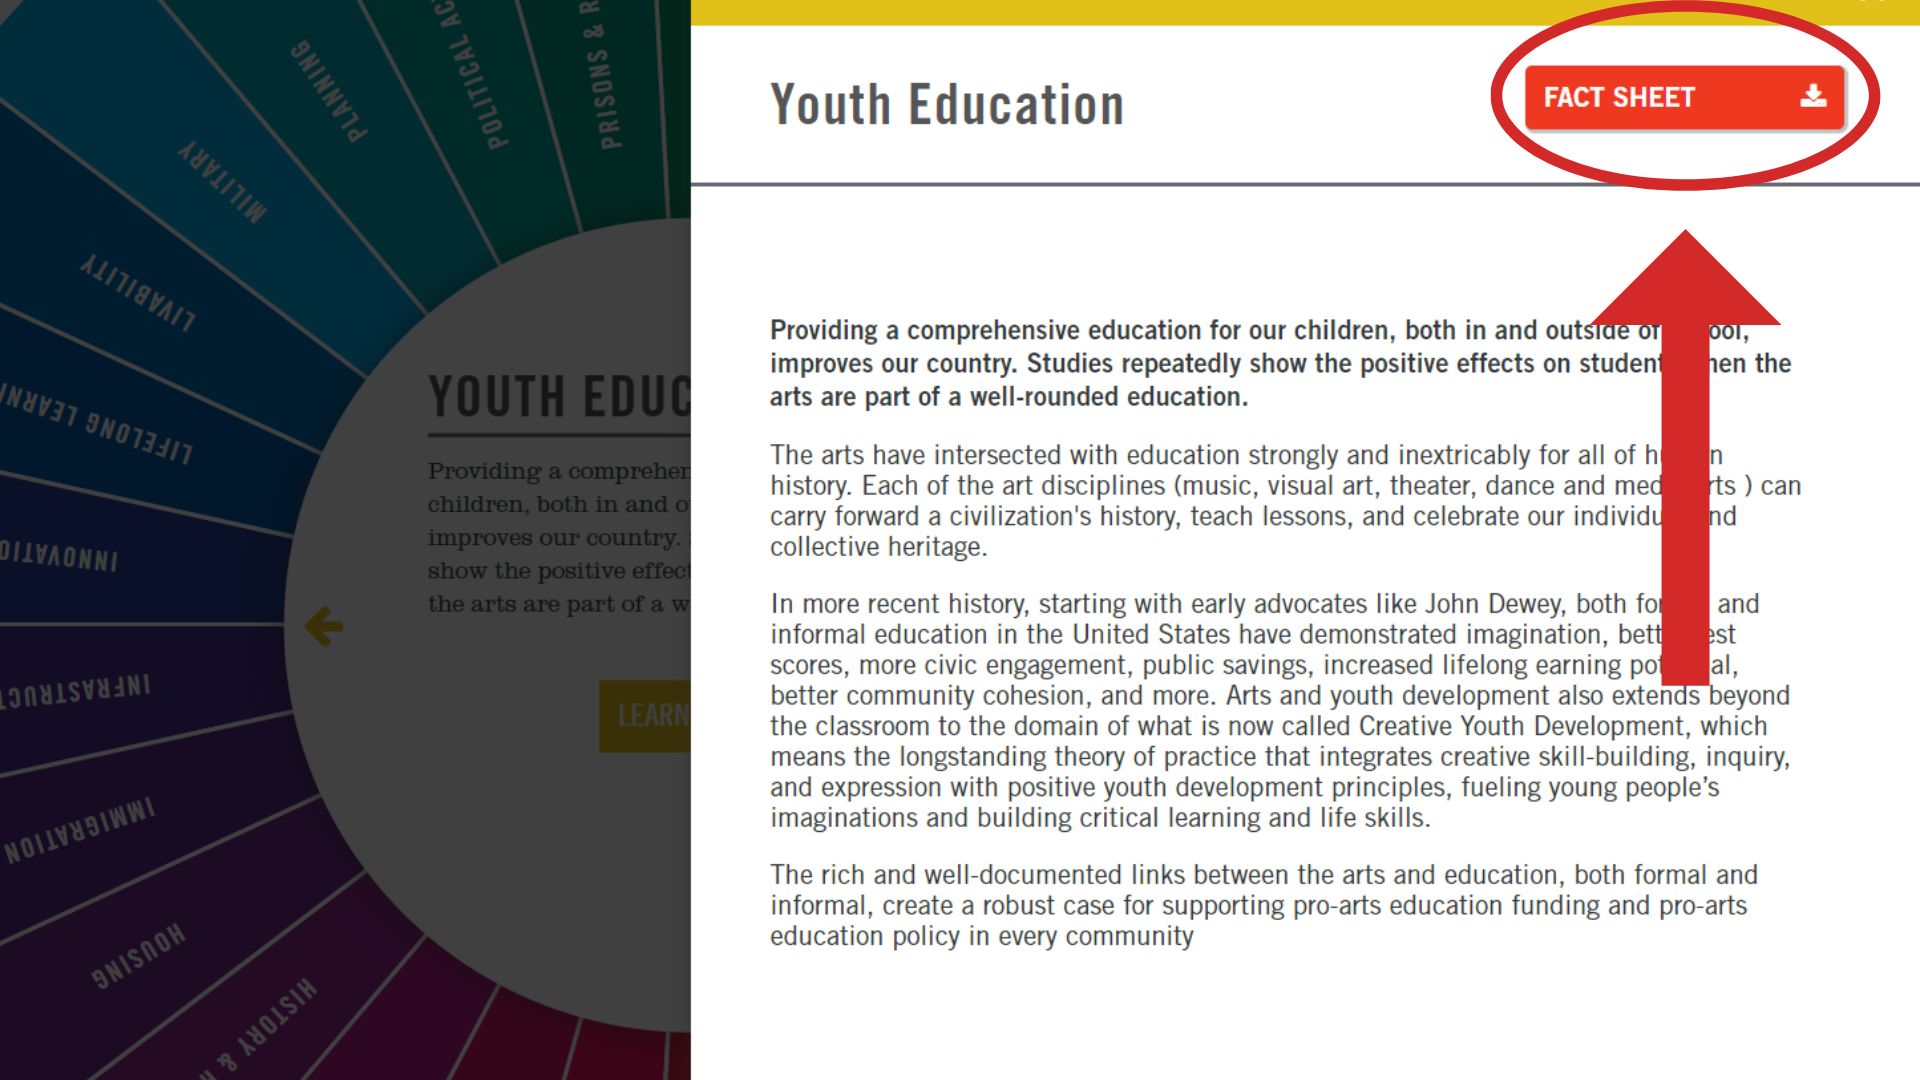 There is an overlay on top of the wheel. The overlay features the text 'Youth Education' and a few paragraphs of text. There is a red button in the upper right hand corner that says 'Fact Sheet' and has a small image indicating the fact sheet is downloadable. A red arrow points to a red circle that is encircling the Fact Sheet button.